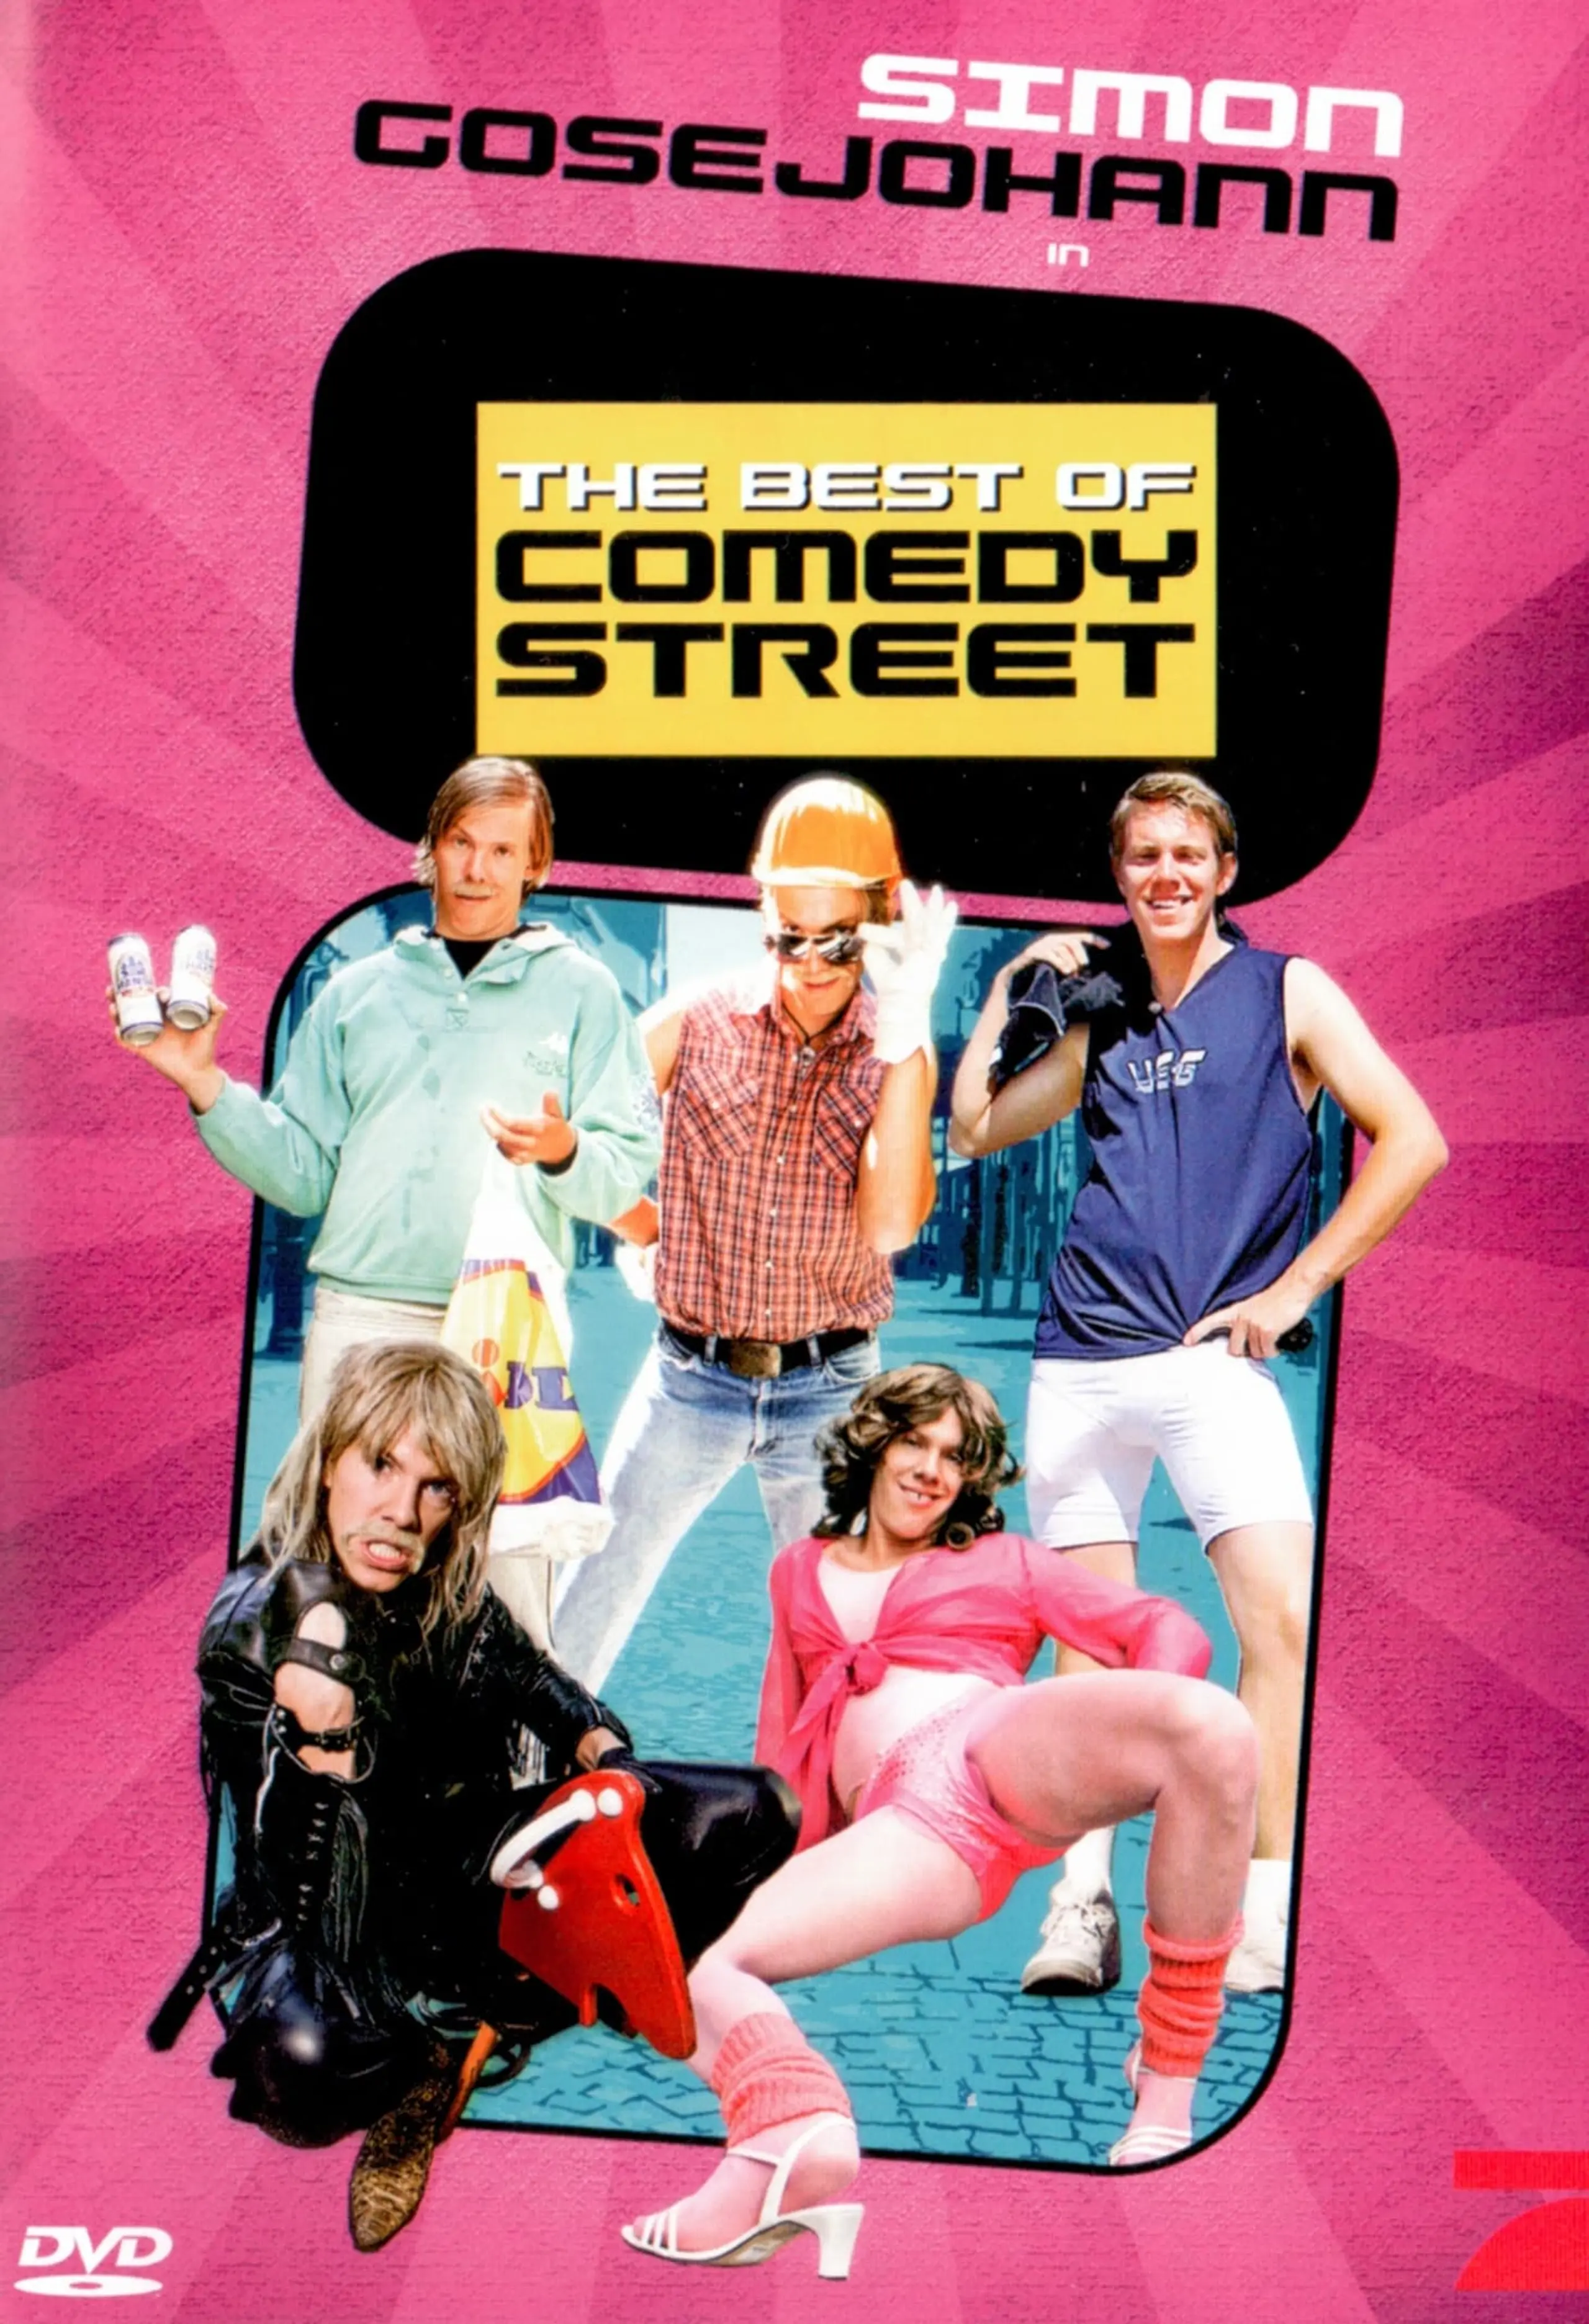 The Best of Comedy Street